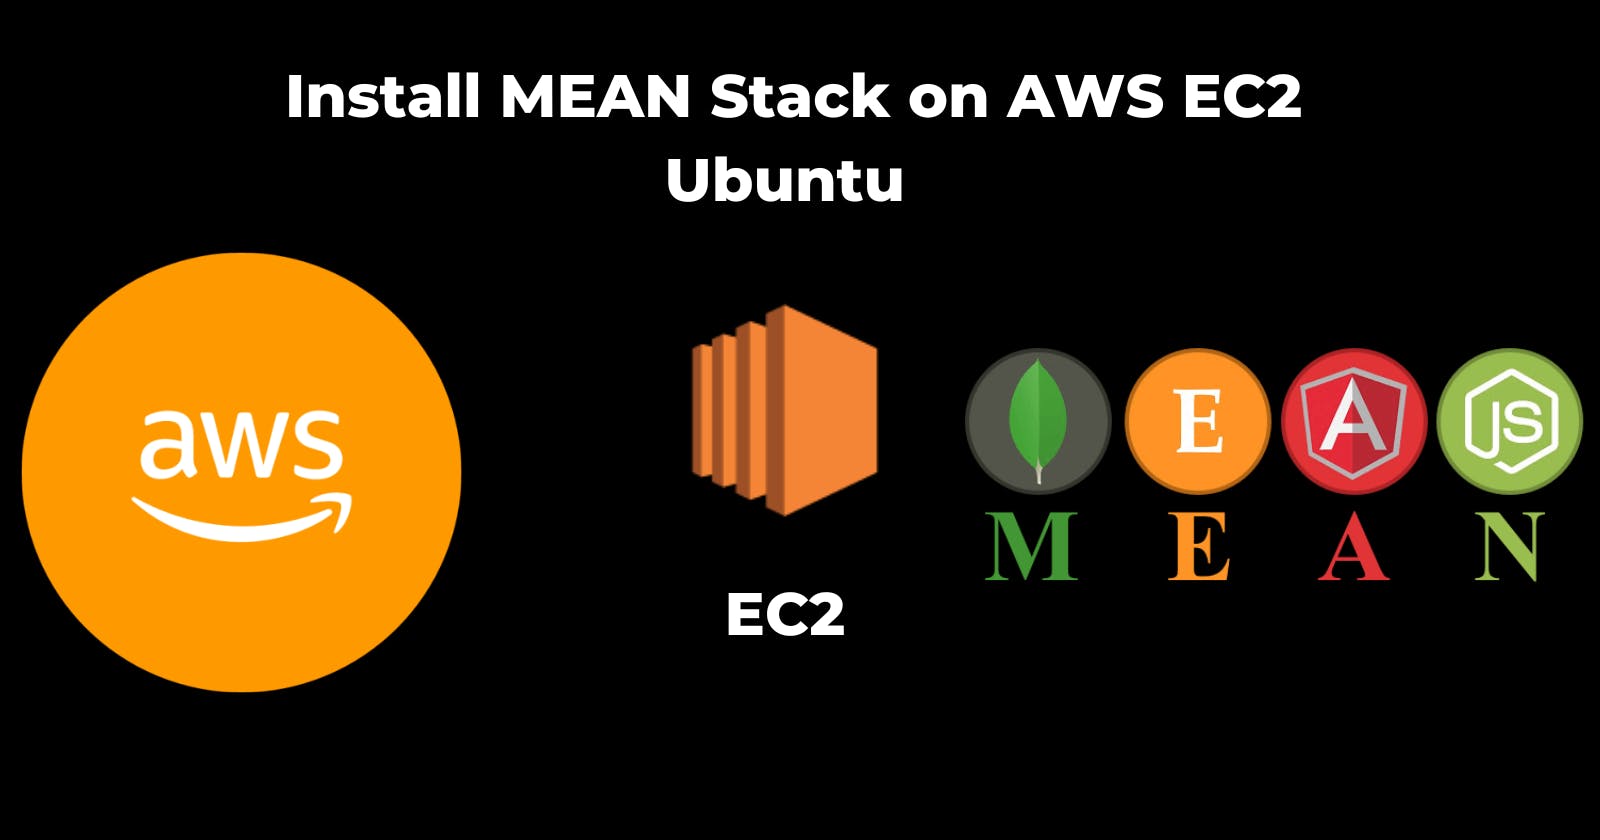 How to Install Mean Stack on AWS EC2 Ubuntu